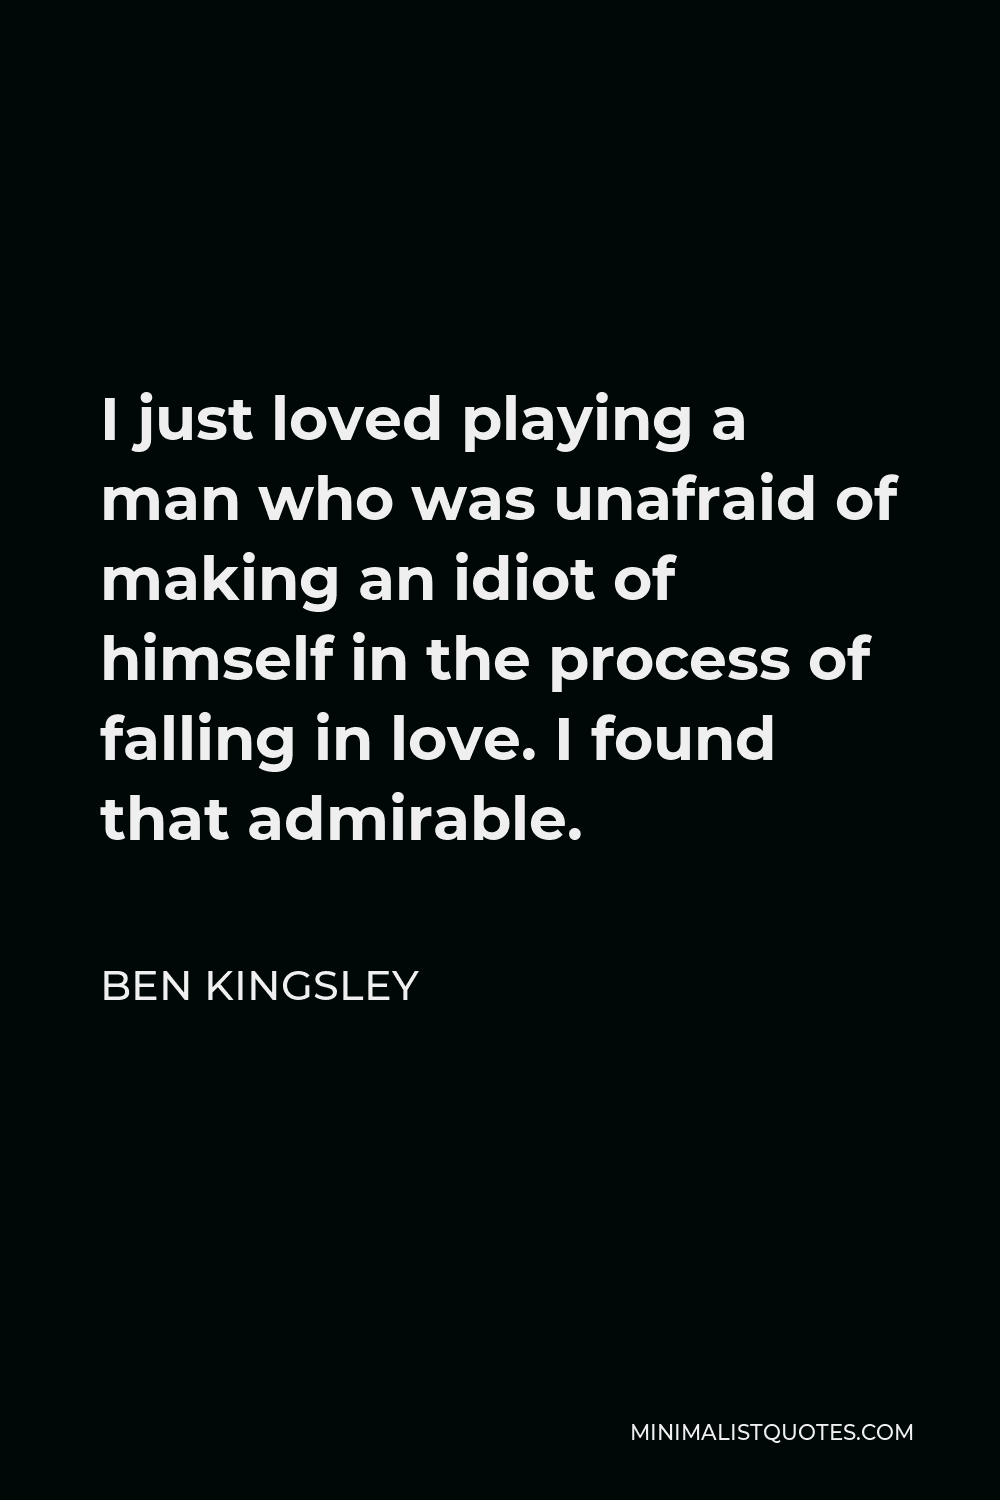 Ben Kingsley Quote - I just loved playing a man who was unafraid of making an idiot of himself in the process of falling in love. I found that admirable.